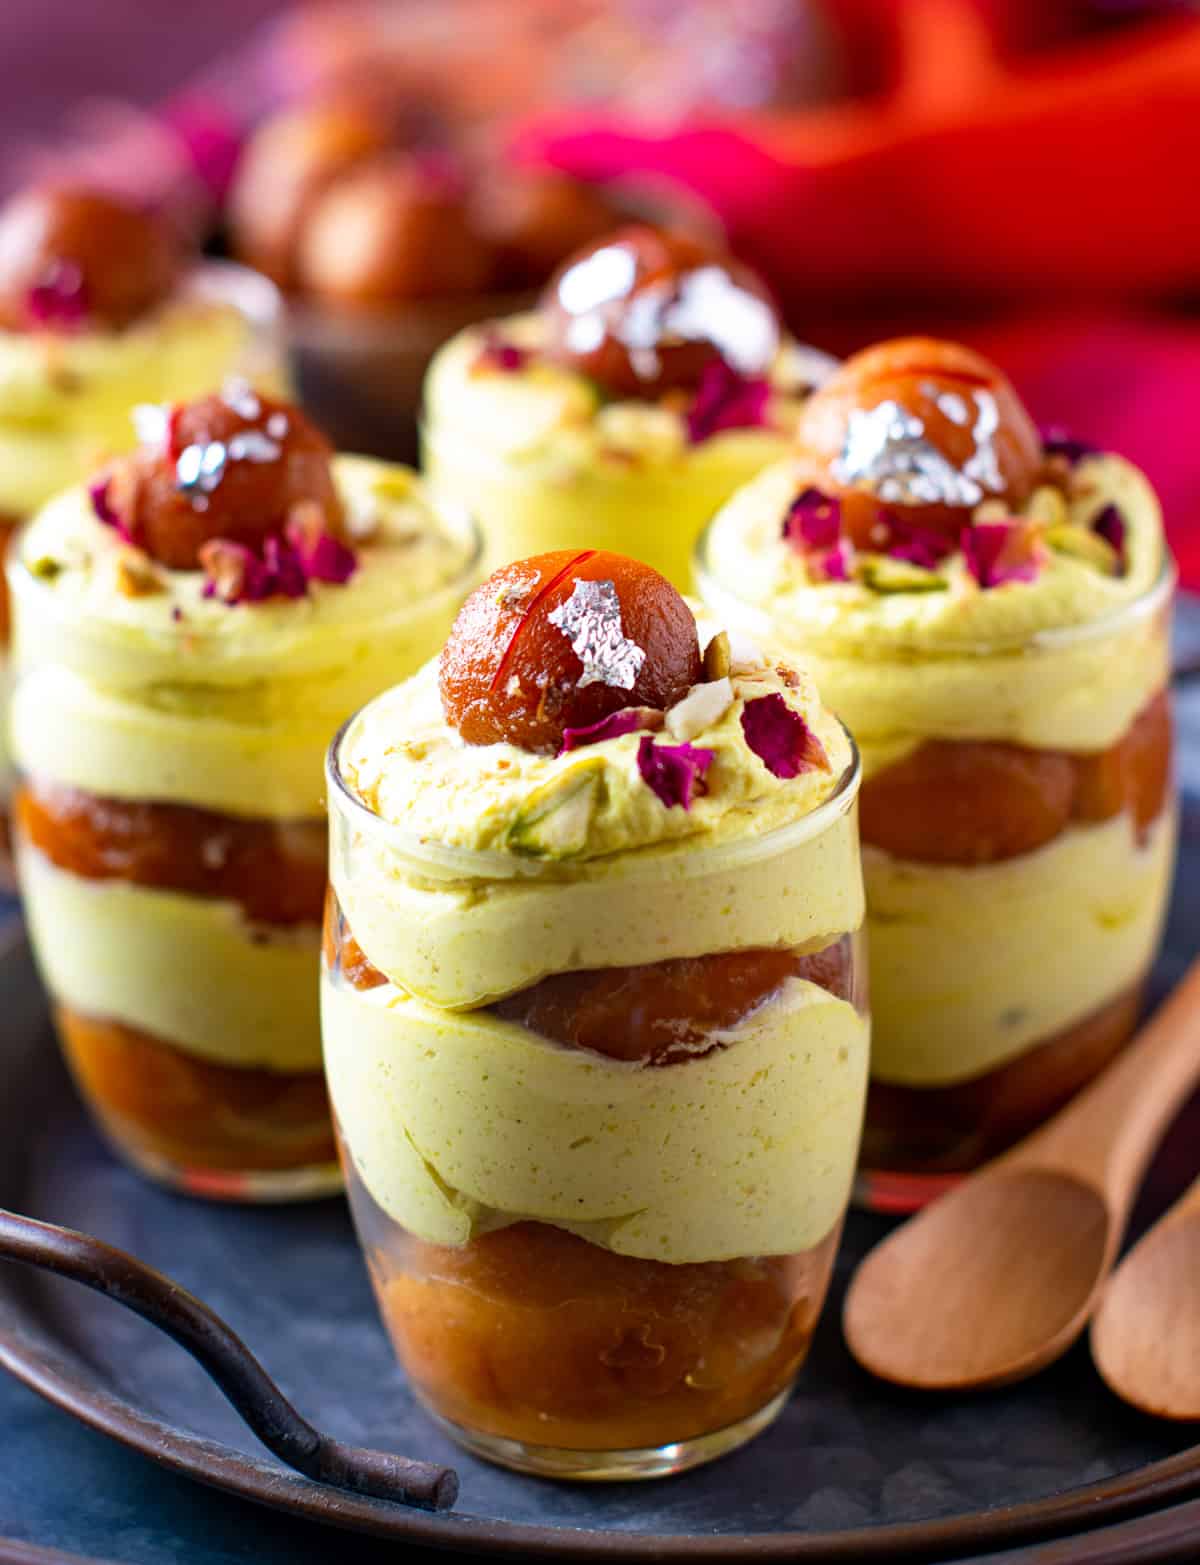 Thandai mousse layered with gulab jamun in a glass